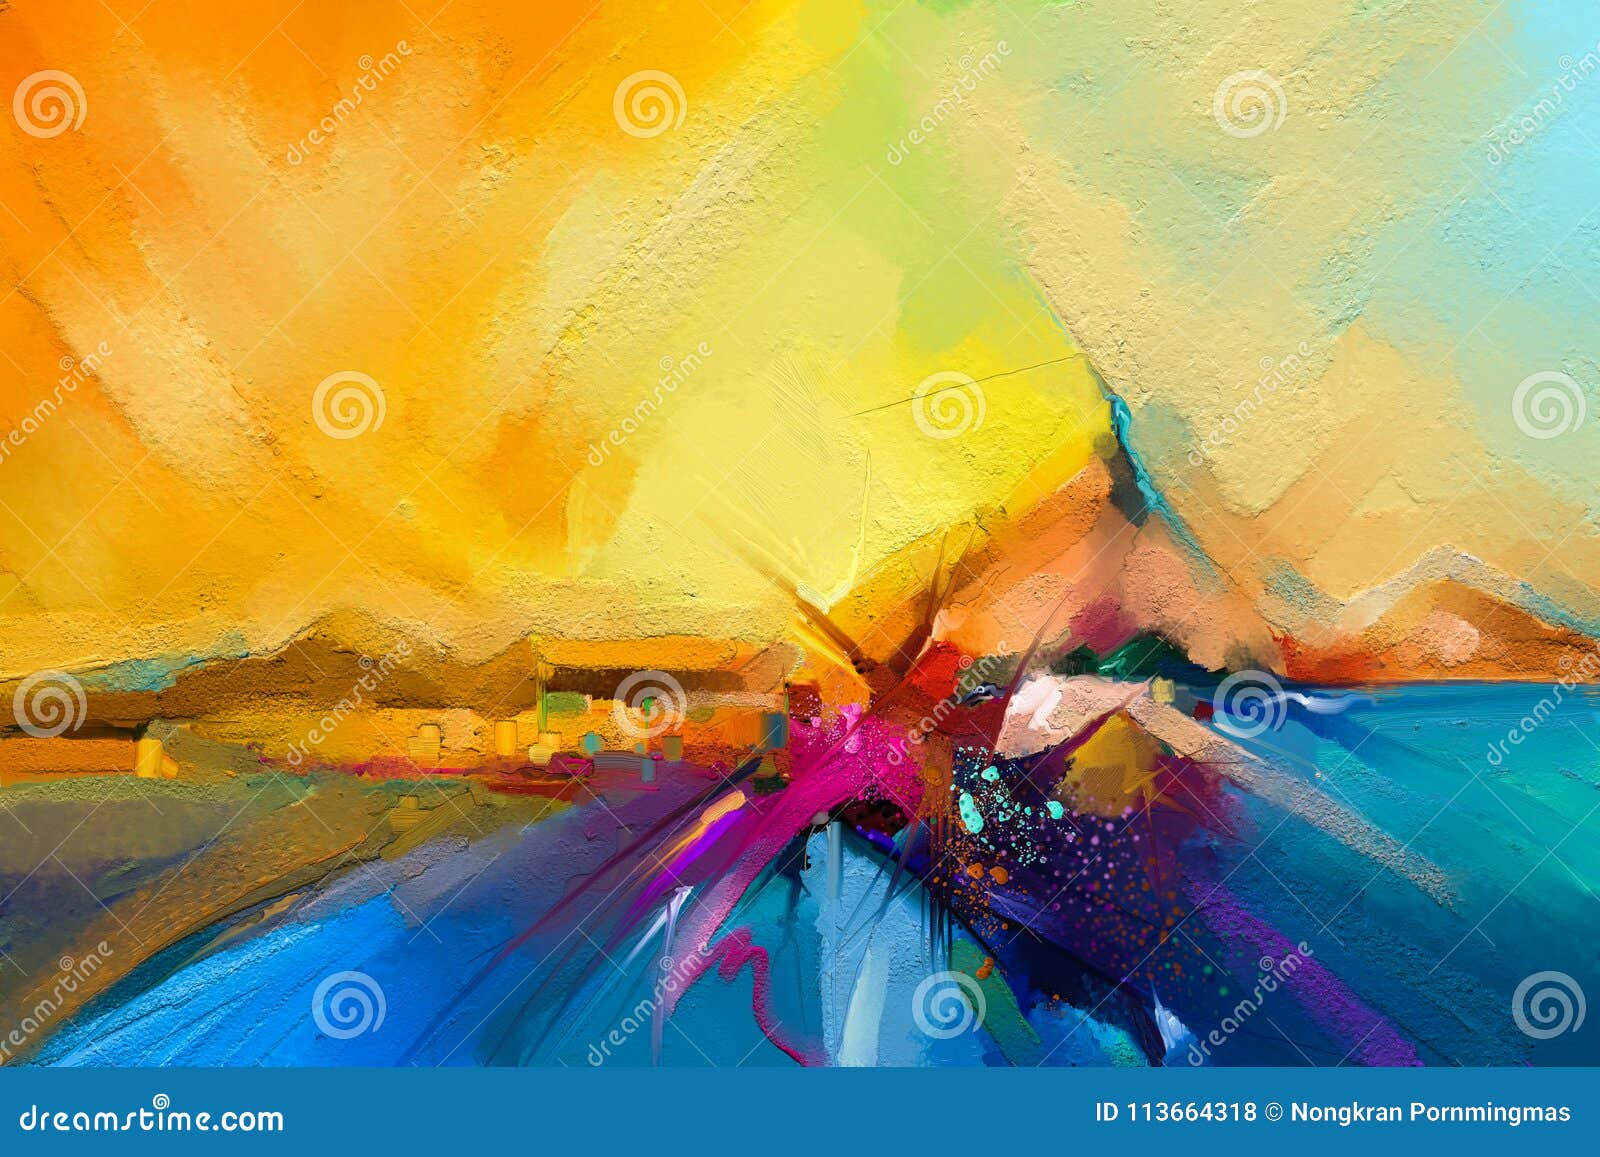 colorful oil painting on canvas texture. semi- abstract image of seascape paintings